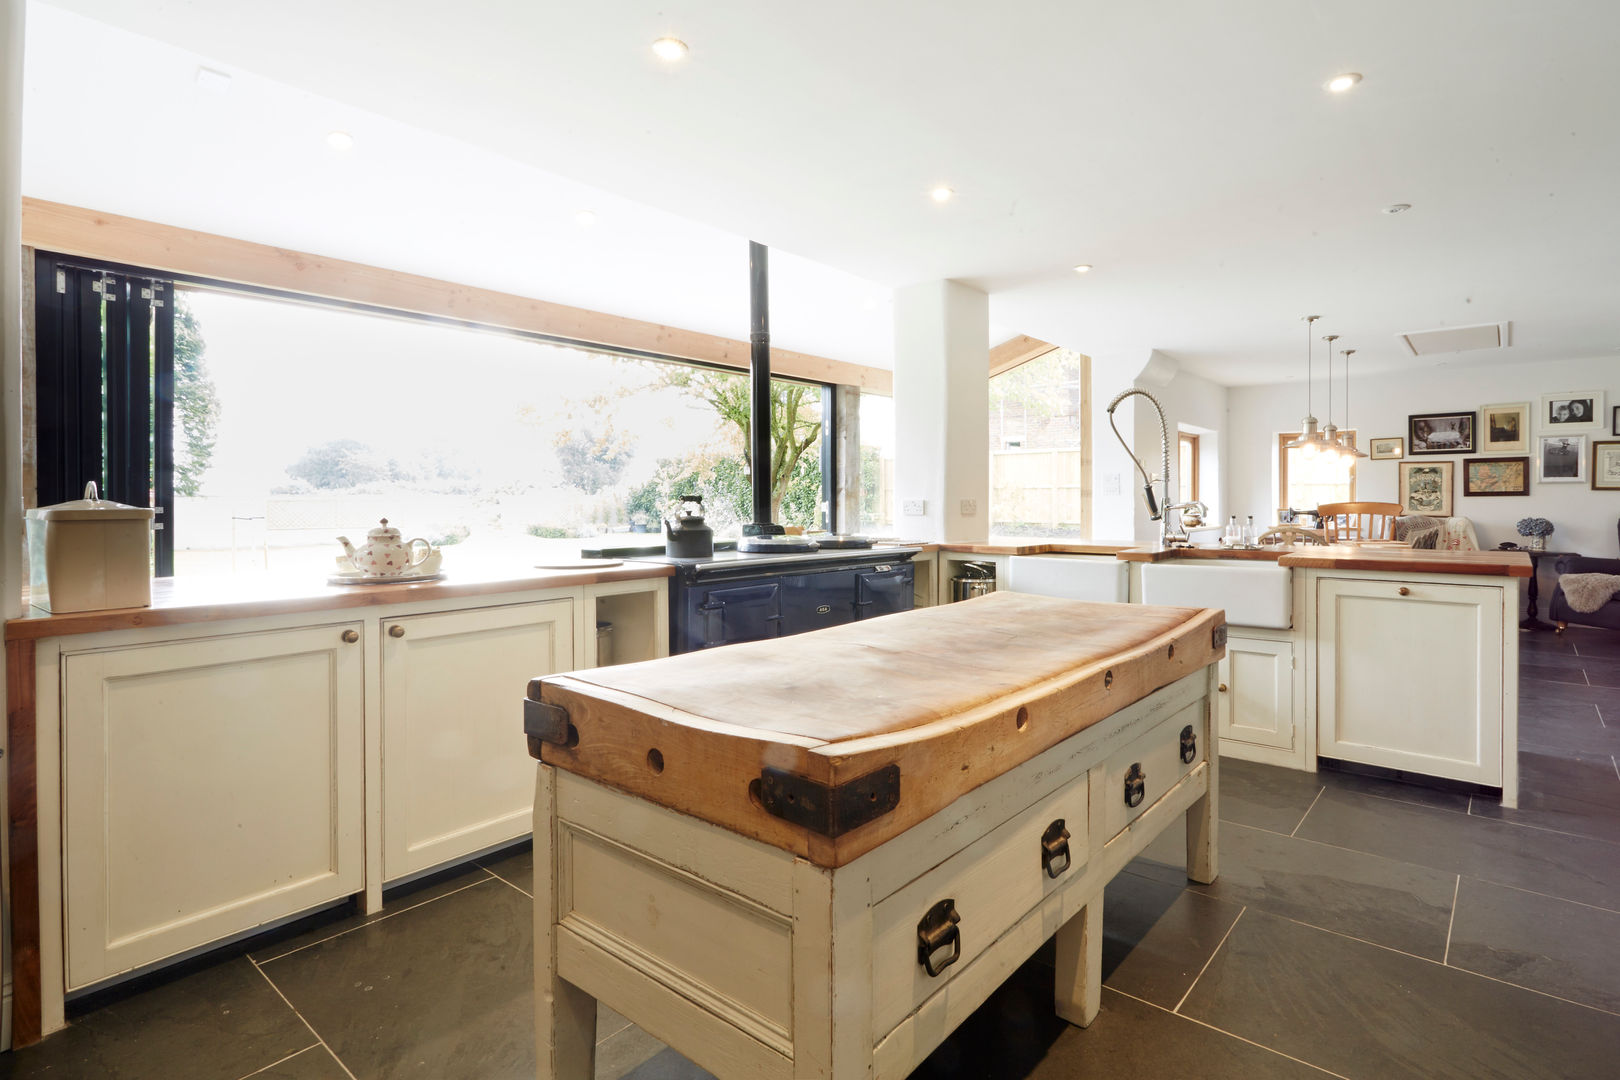 Country Kitchen Hart Design and Construction Cucina rurale